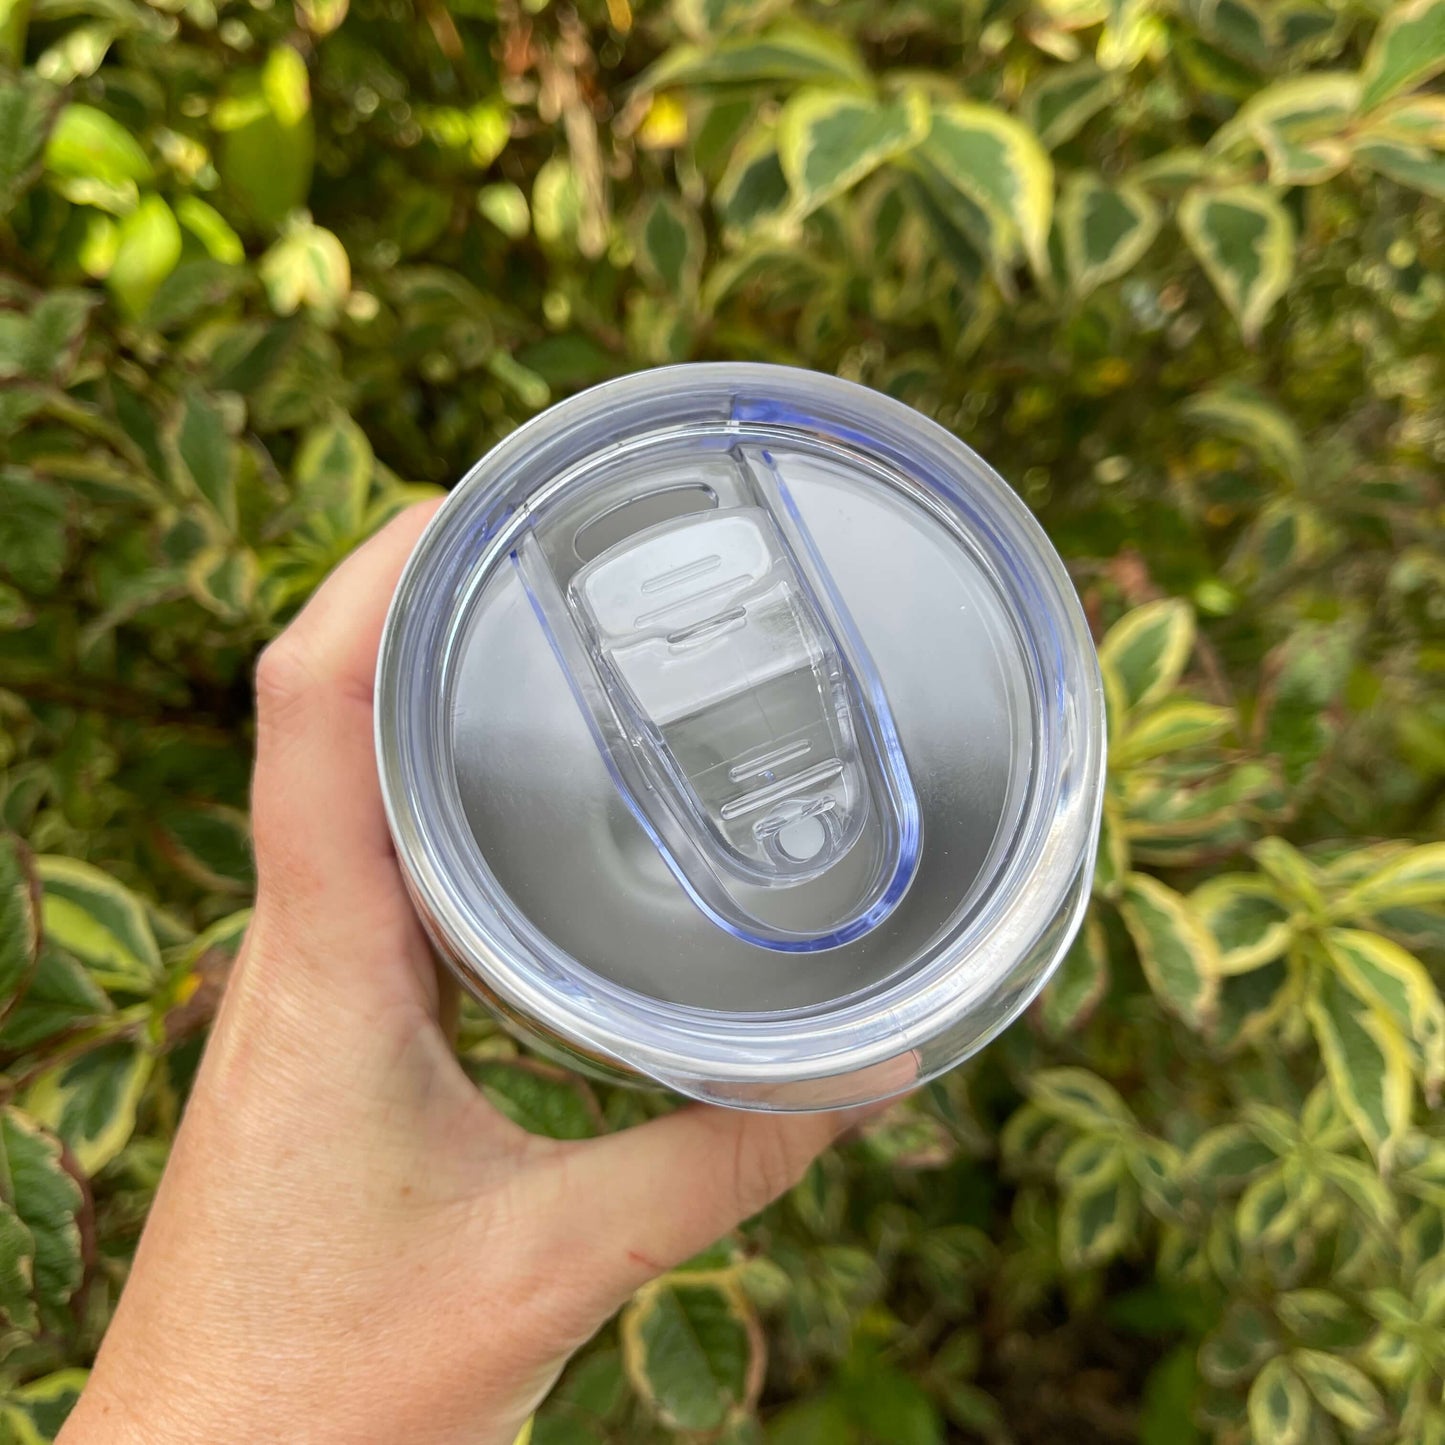 Birds eye view of the top of a reusable coffee mug showing the clear plastic lid.